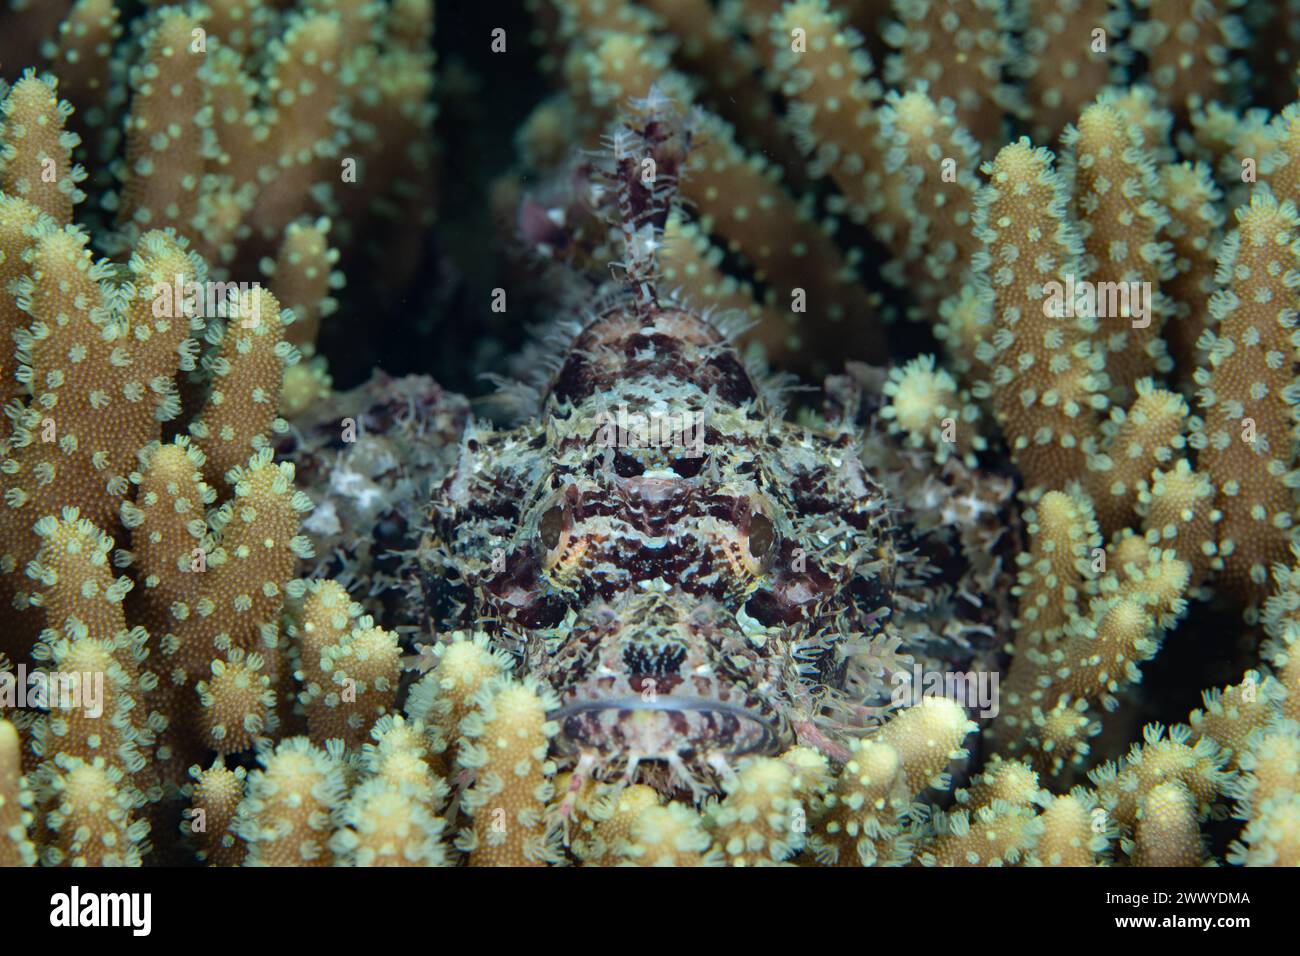 A well-camouflaged scorpionfish, Scorpaenopsis sp., waits amid soft coral tentacles to ambush unwary prey on a coral reef in Raja Ampat, Indonesia. Stock Photo